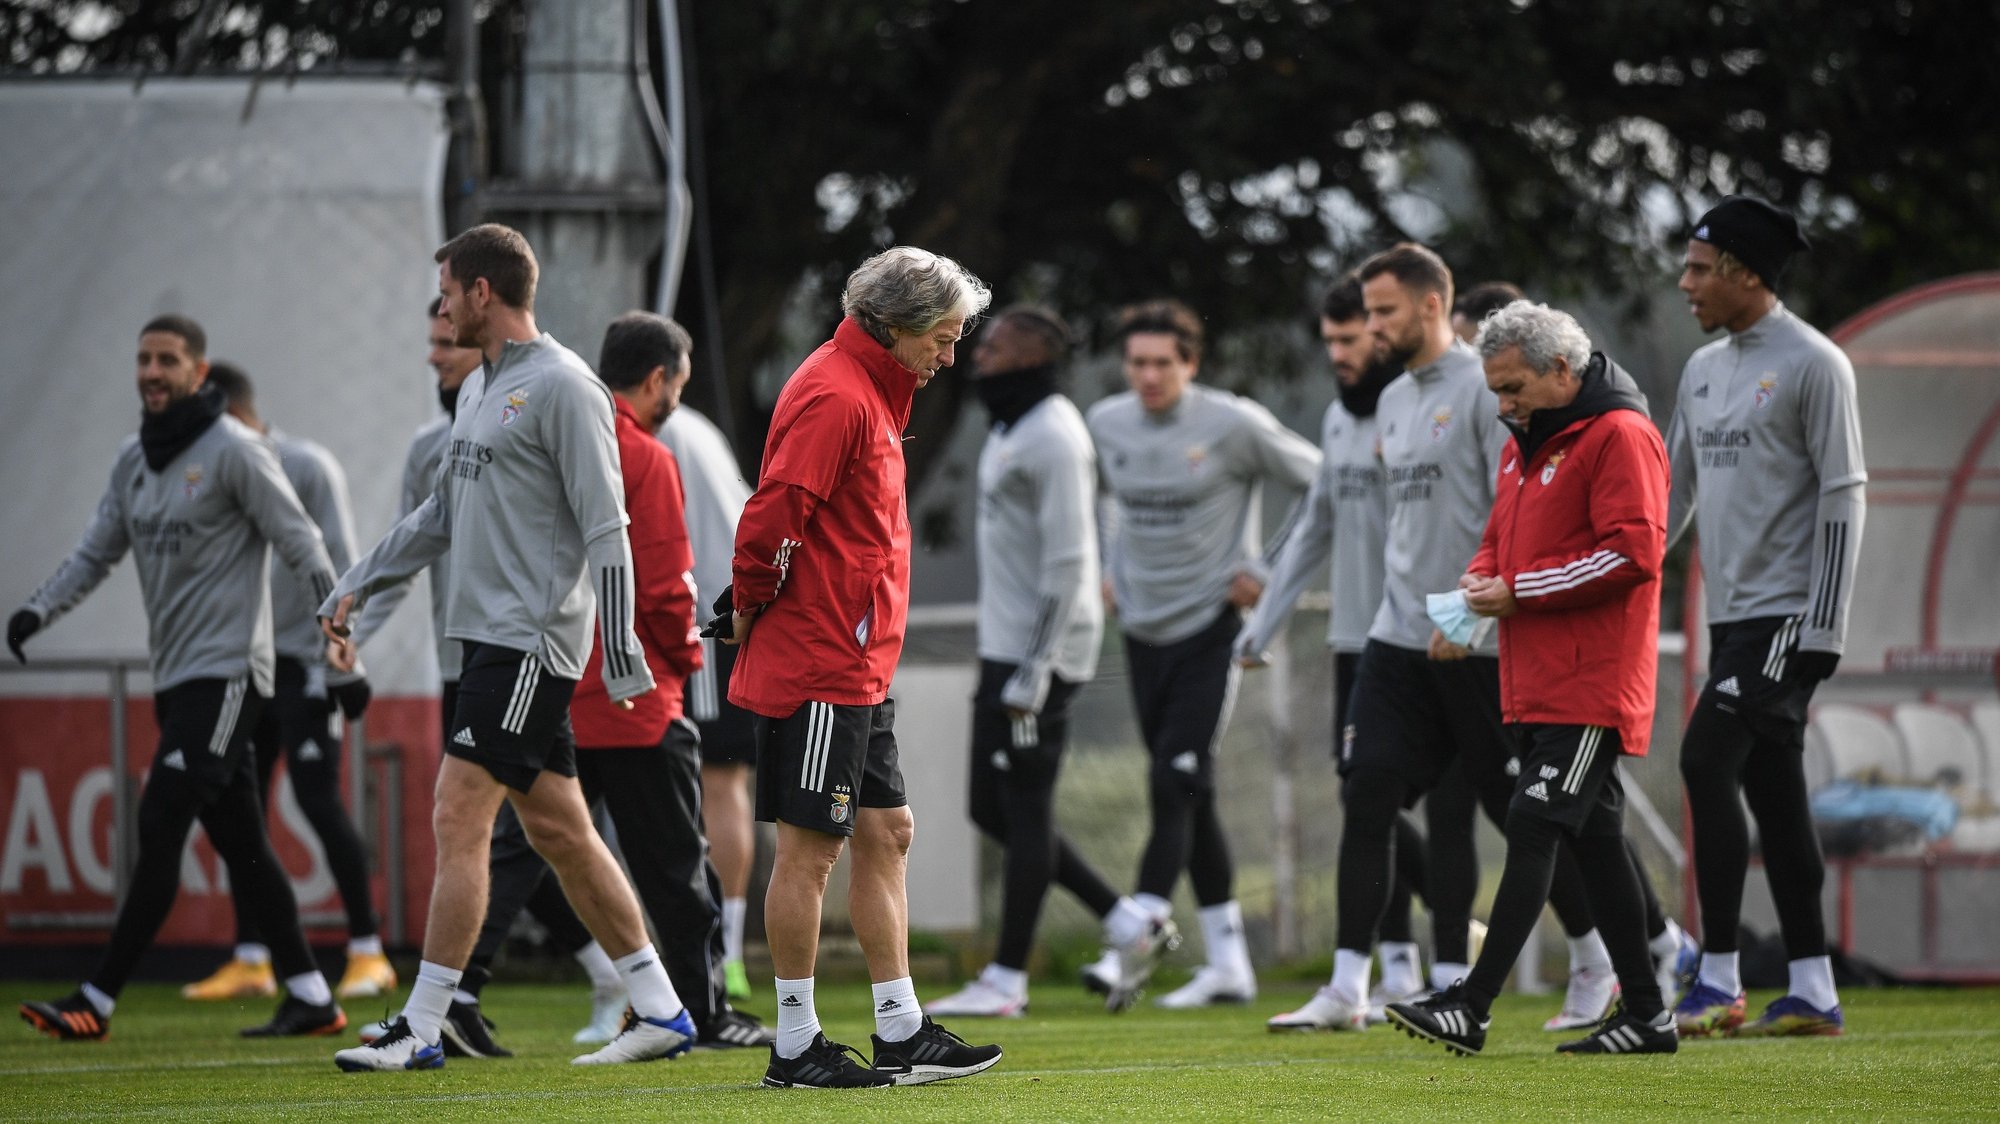 epa08872252 SL Benfica&#039;s coach Jorge Jesus (C) leads a training session at Benfica Campus in Seixal, near Lisbon, Portugal, 9 December 2020. SL Benfica will play against Standard Liege in their UEFA Europa League Group D match on 10 December 2020.  EPA/MARIO CRUZ